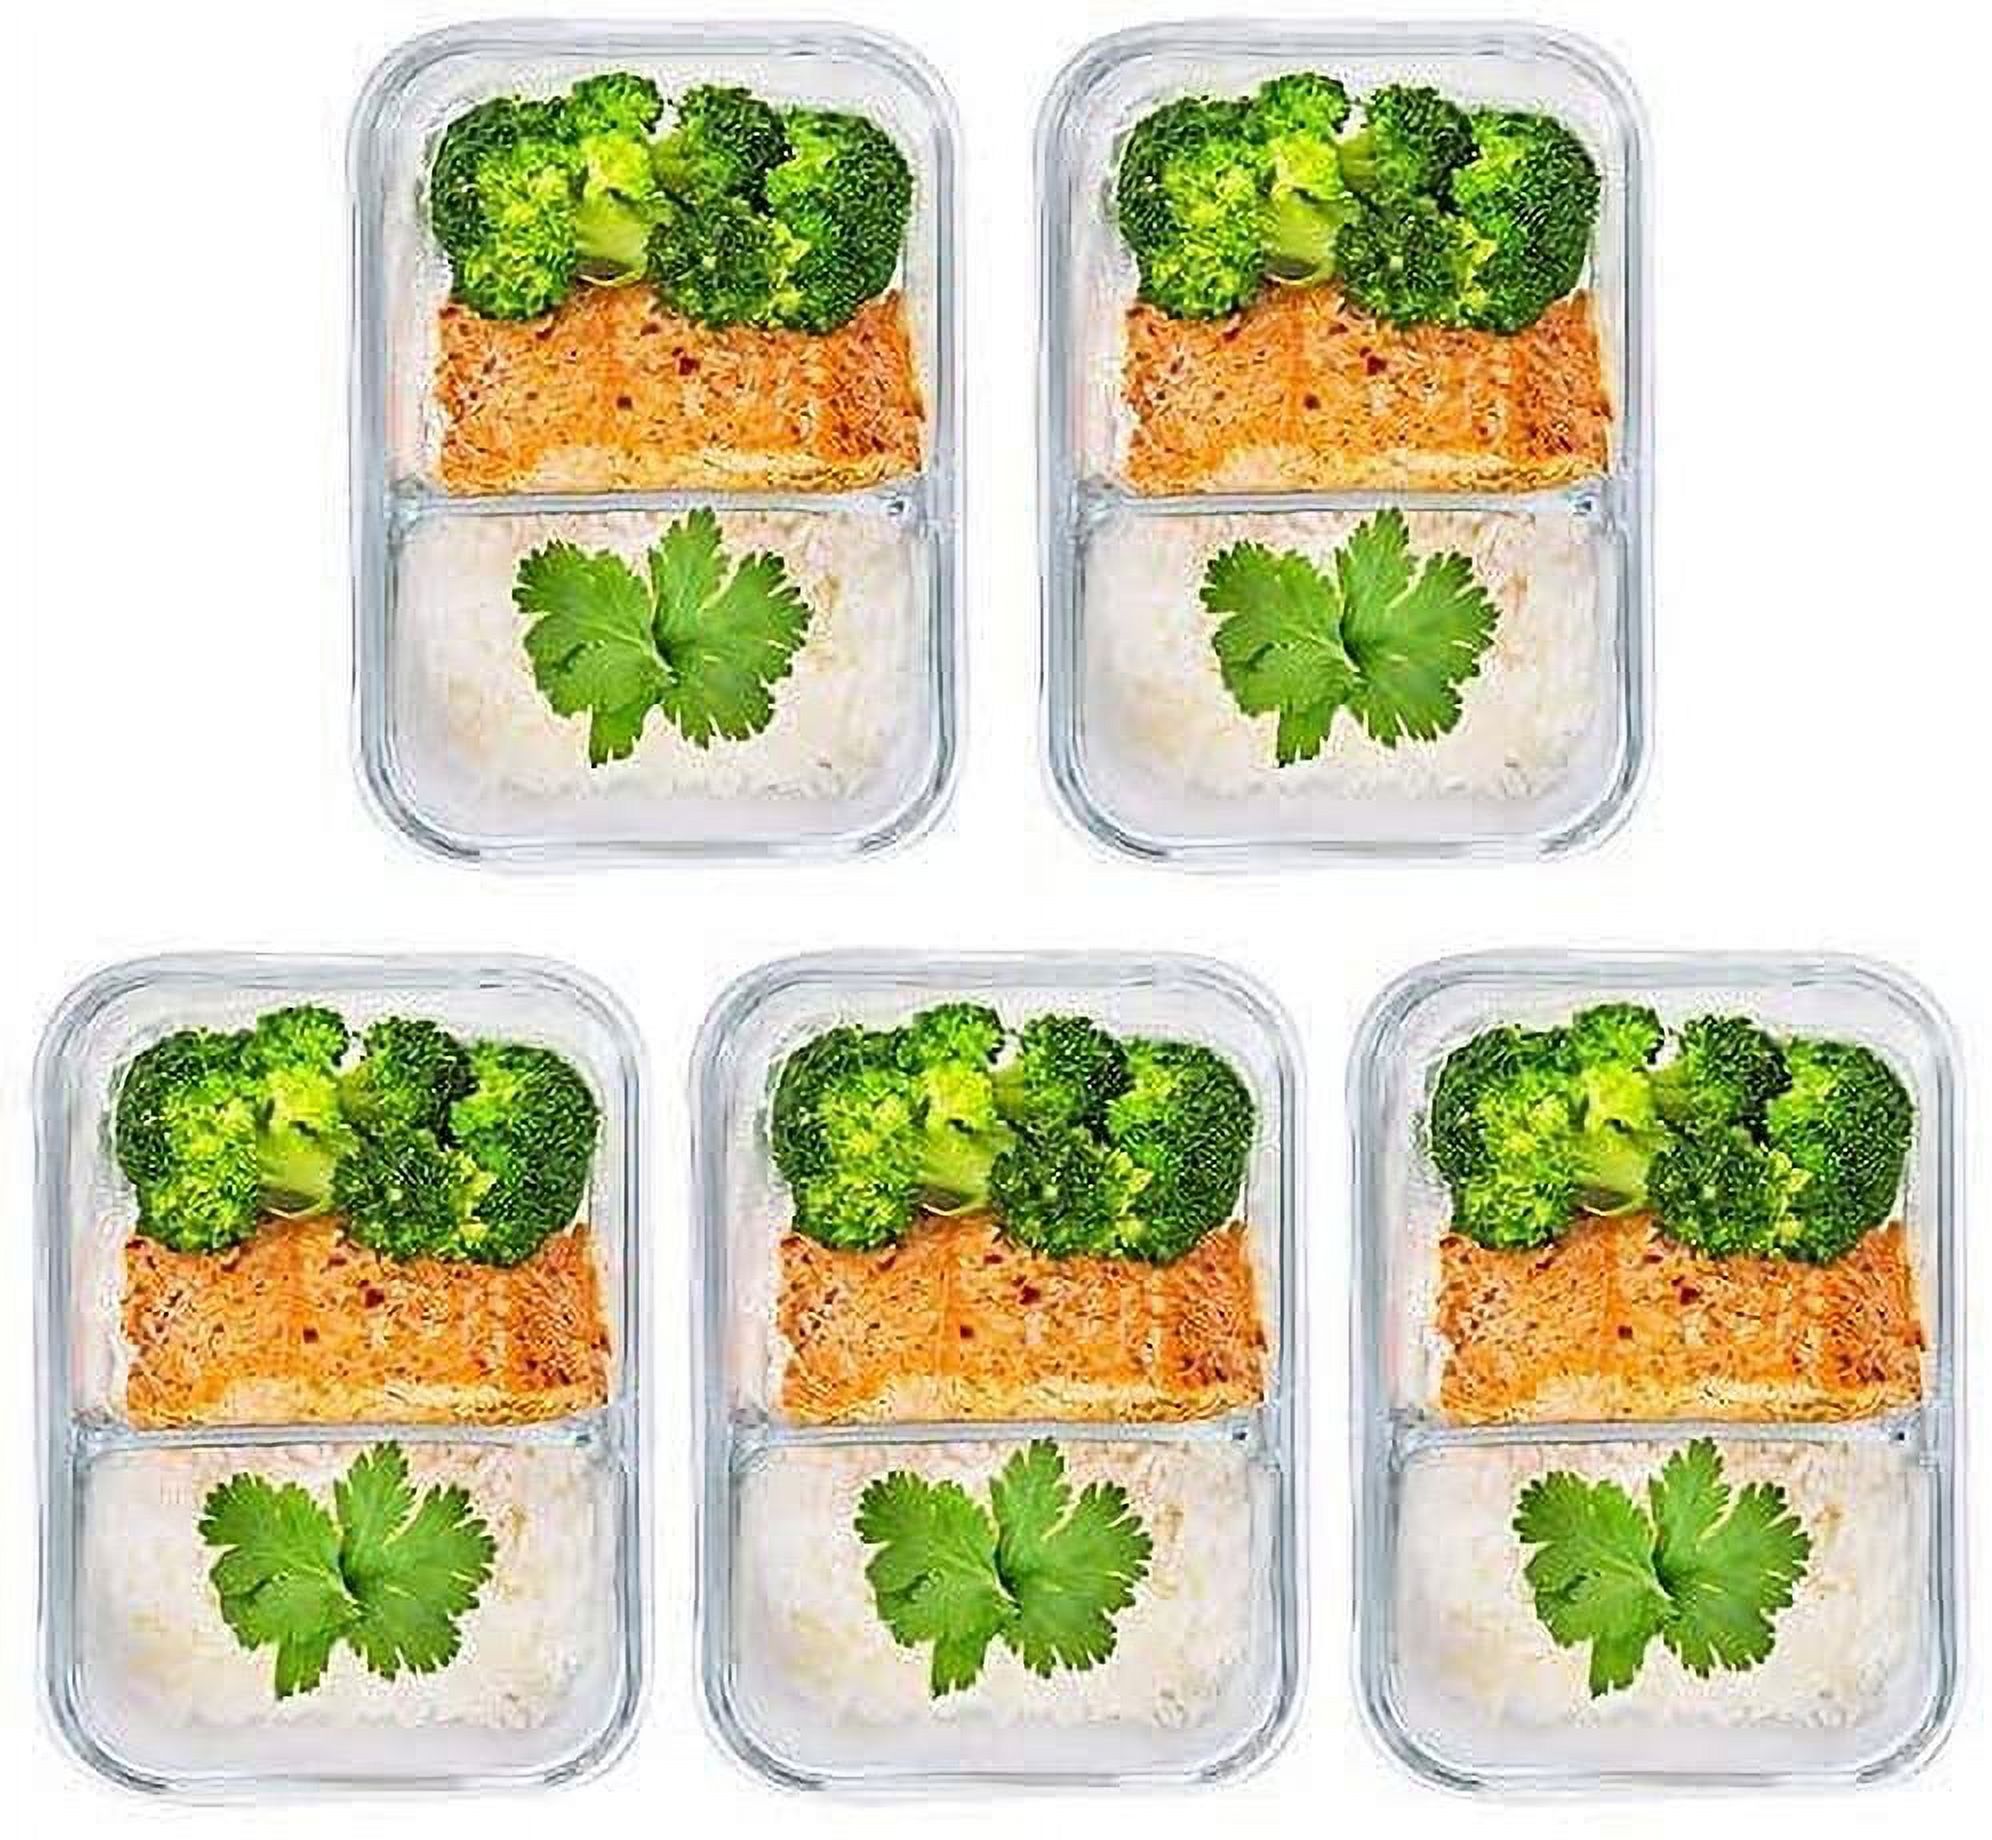 Prep Naturals - Glass Food Storage Containers - Meal Prep Container - 5 Packs, 2 Compartments, 30 Oz - image 5 of 6